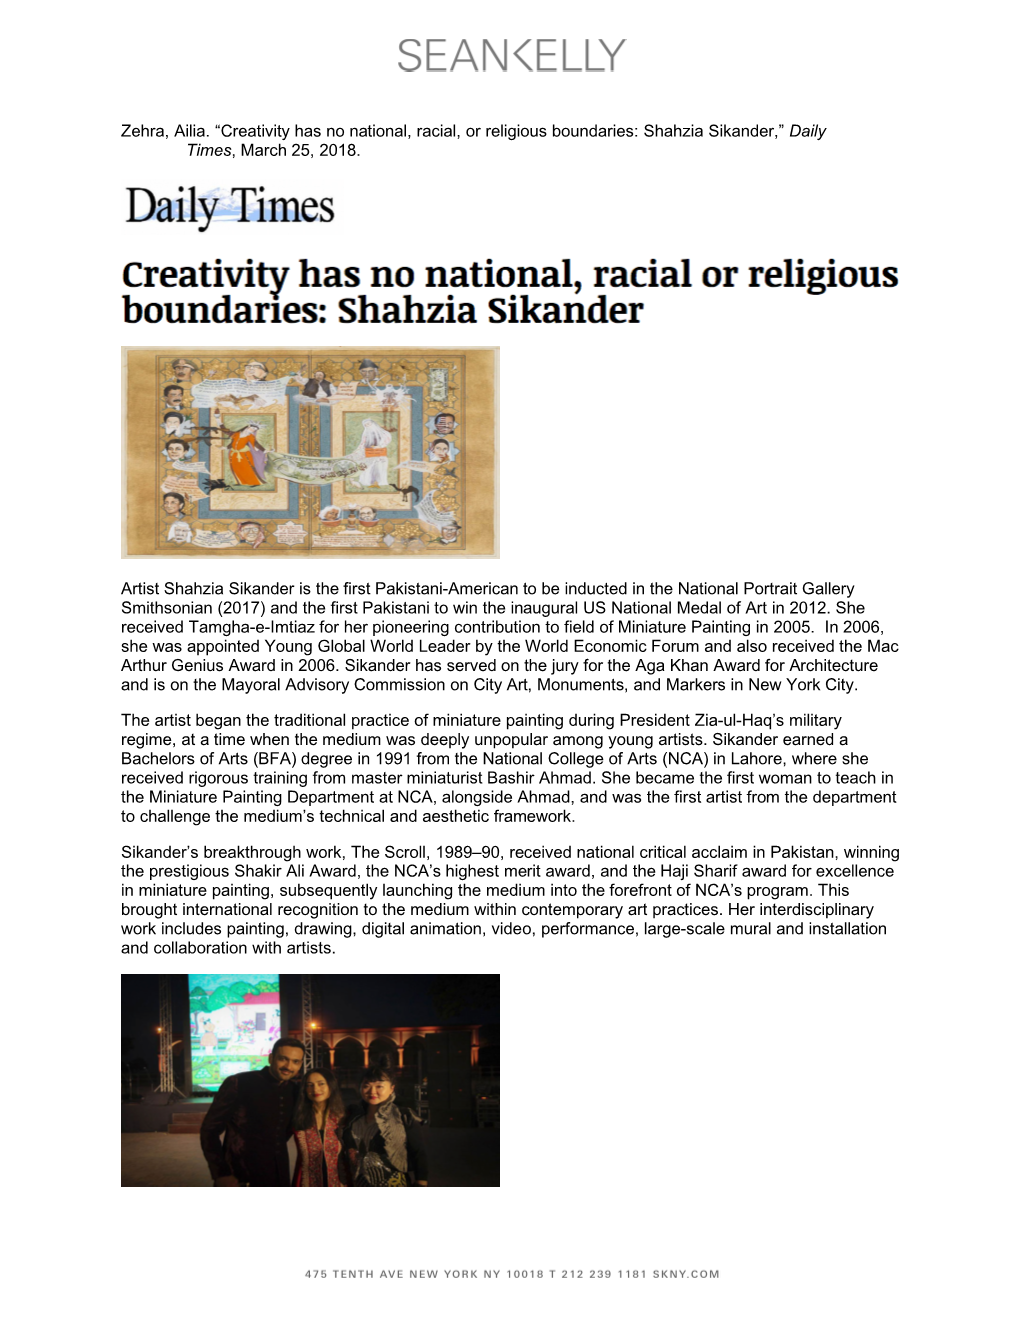 Creativity Has No National, Racial, Or Religious Boundaries: Shahzia Sikander,” Daily Times, March 25, 2018